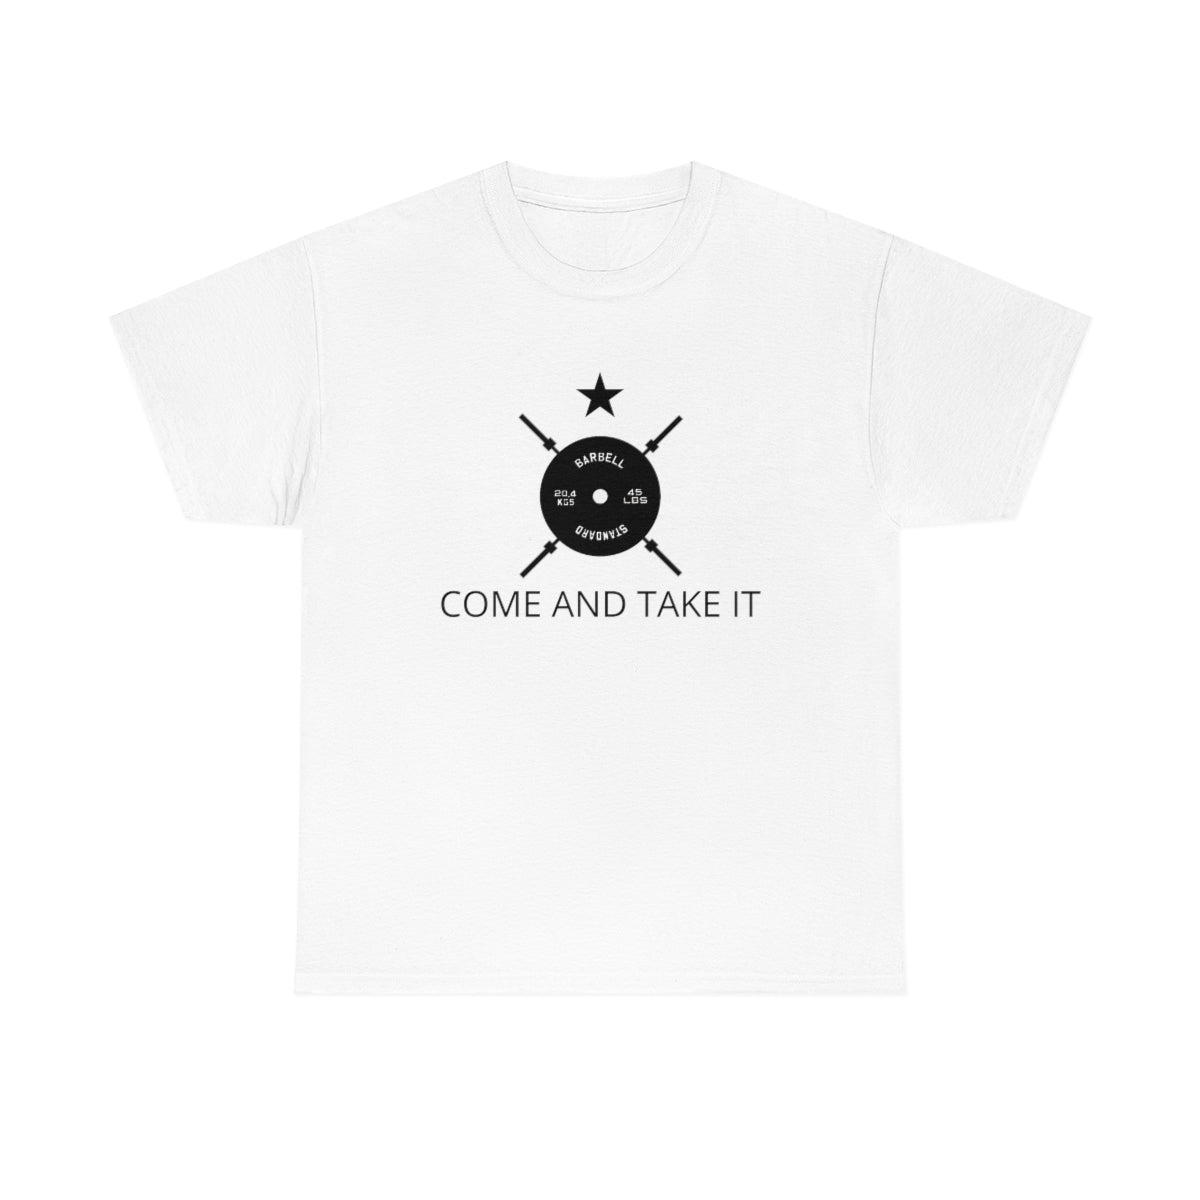 Come and Take It - Weights Tee